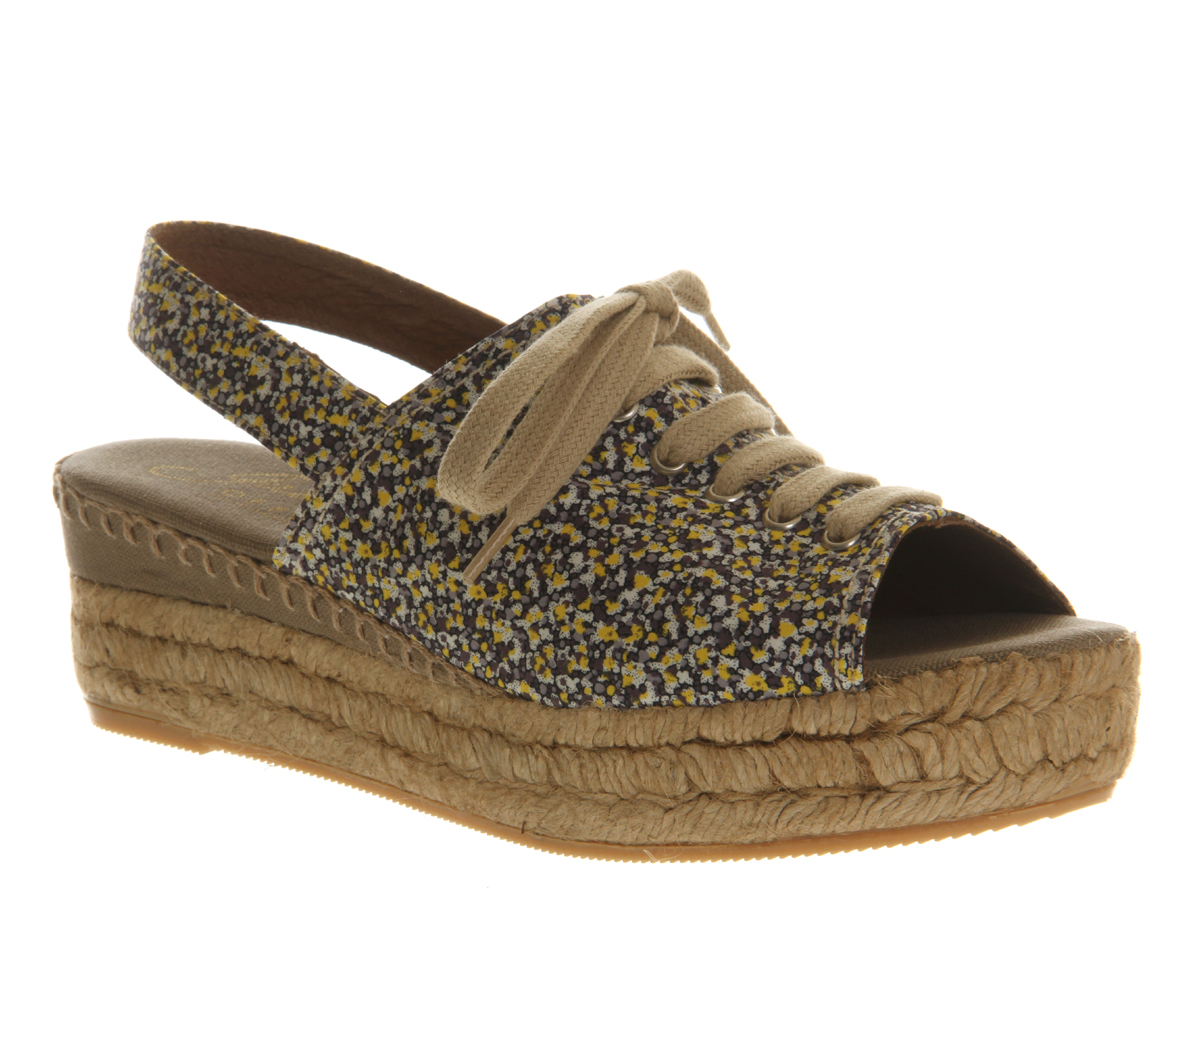 Gaimo for OFFICEDaffodil Lace Up EspadrilleFloral Print